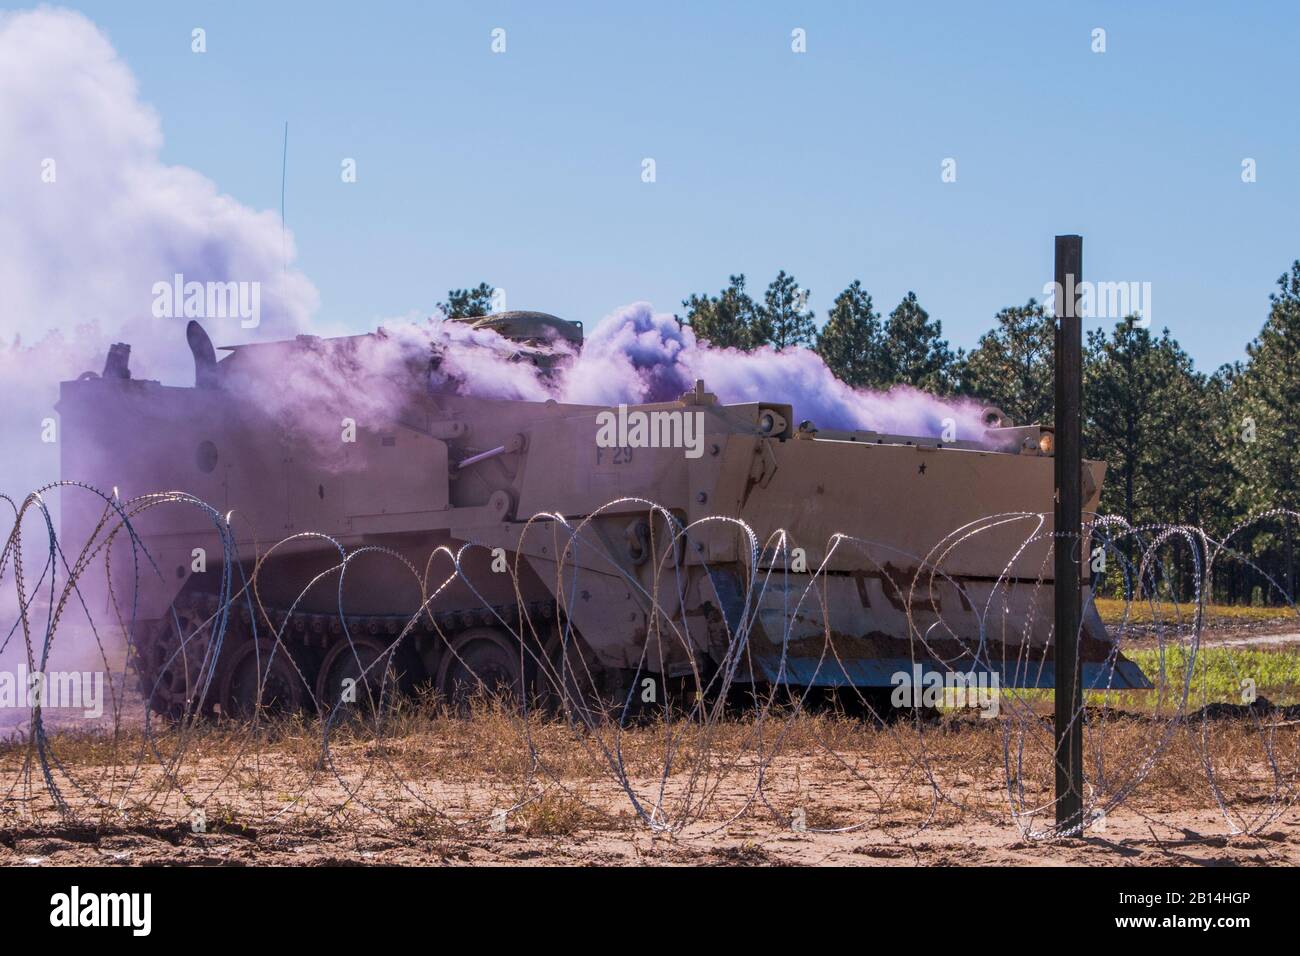 U.S. Soldiers assigned to the South Carolina Army National Guard's 4th Battalion, 118th Infantry Regiment, 218th Maneuver Enhancement Brigade and 174th Engineer Company conduct combined arms breaching exercises at McCrady Training Center in Eastover, South Carolina, Nov. 3, 2018.  The infantry companies practiced attacking an objective using support from the 174th engineer mobility assault platoons for obstacle reduction, destruction and short-gap crossings. The combined forces breached wired obstacles using simulated M58 Mine Clearing Line Charge (MICLIC) rockets, cleared minefields with an M Stock Photo